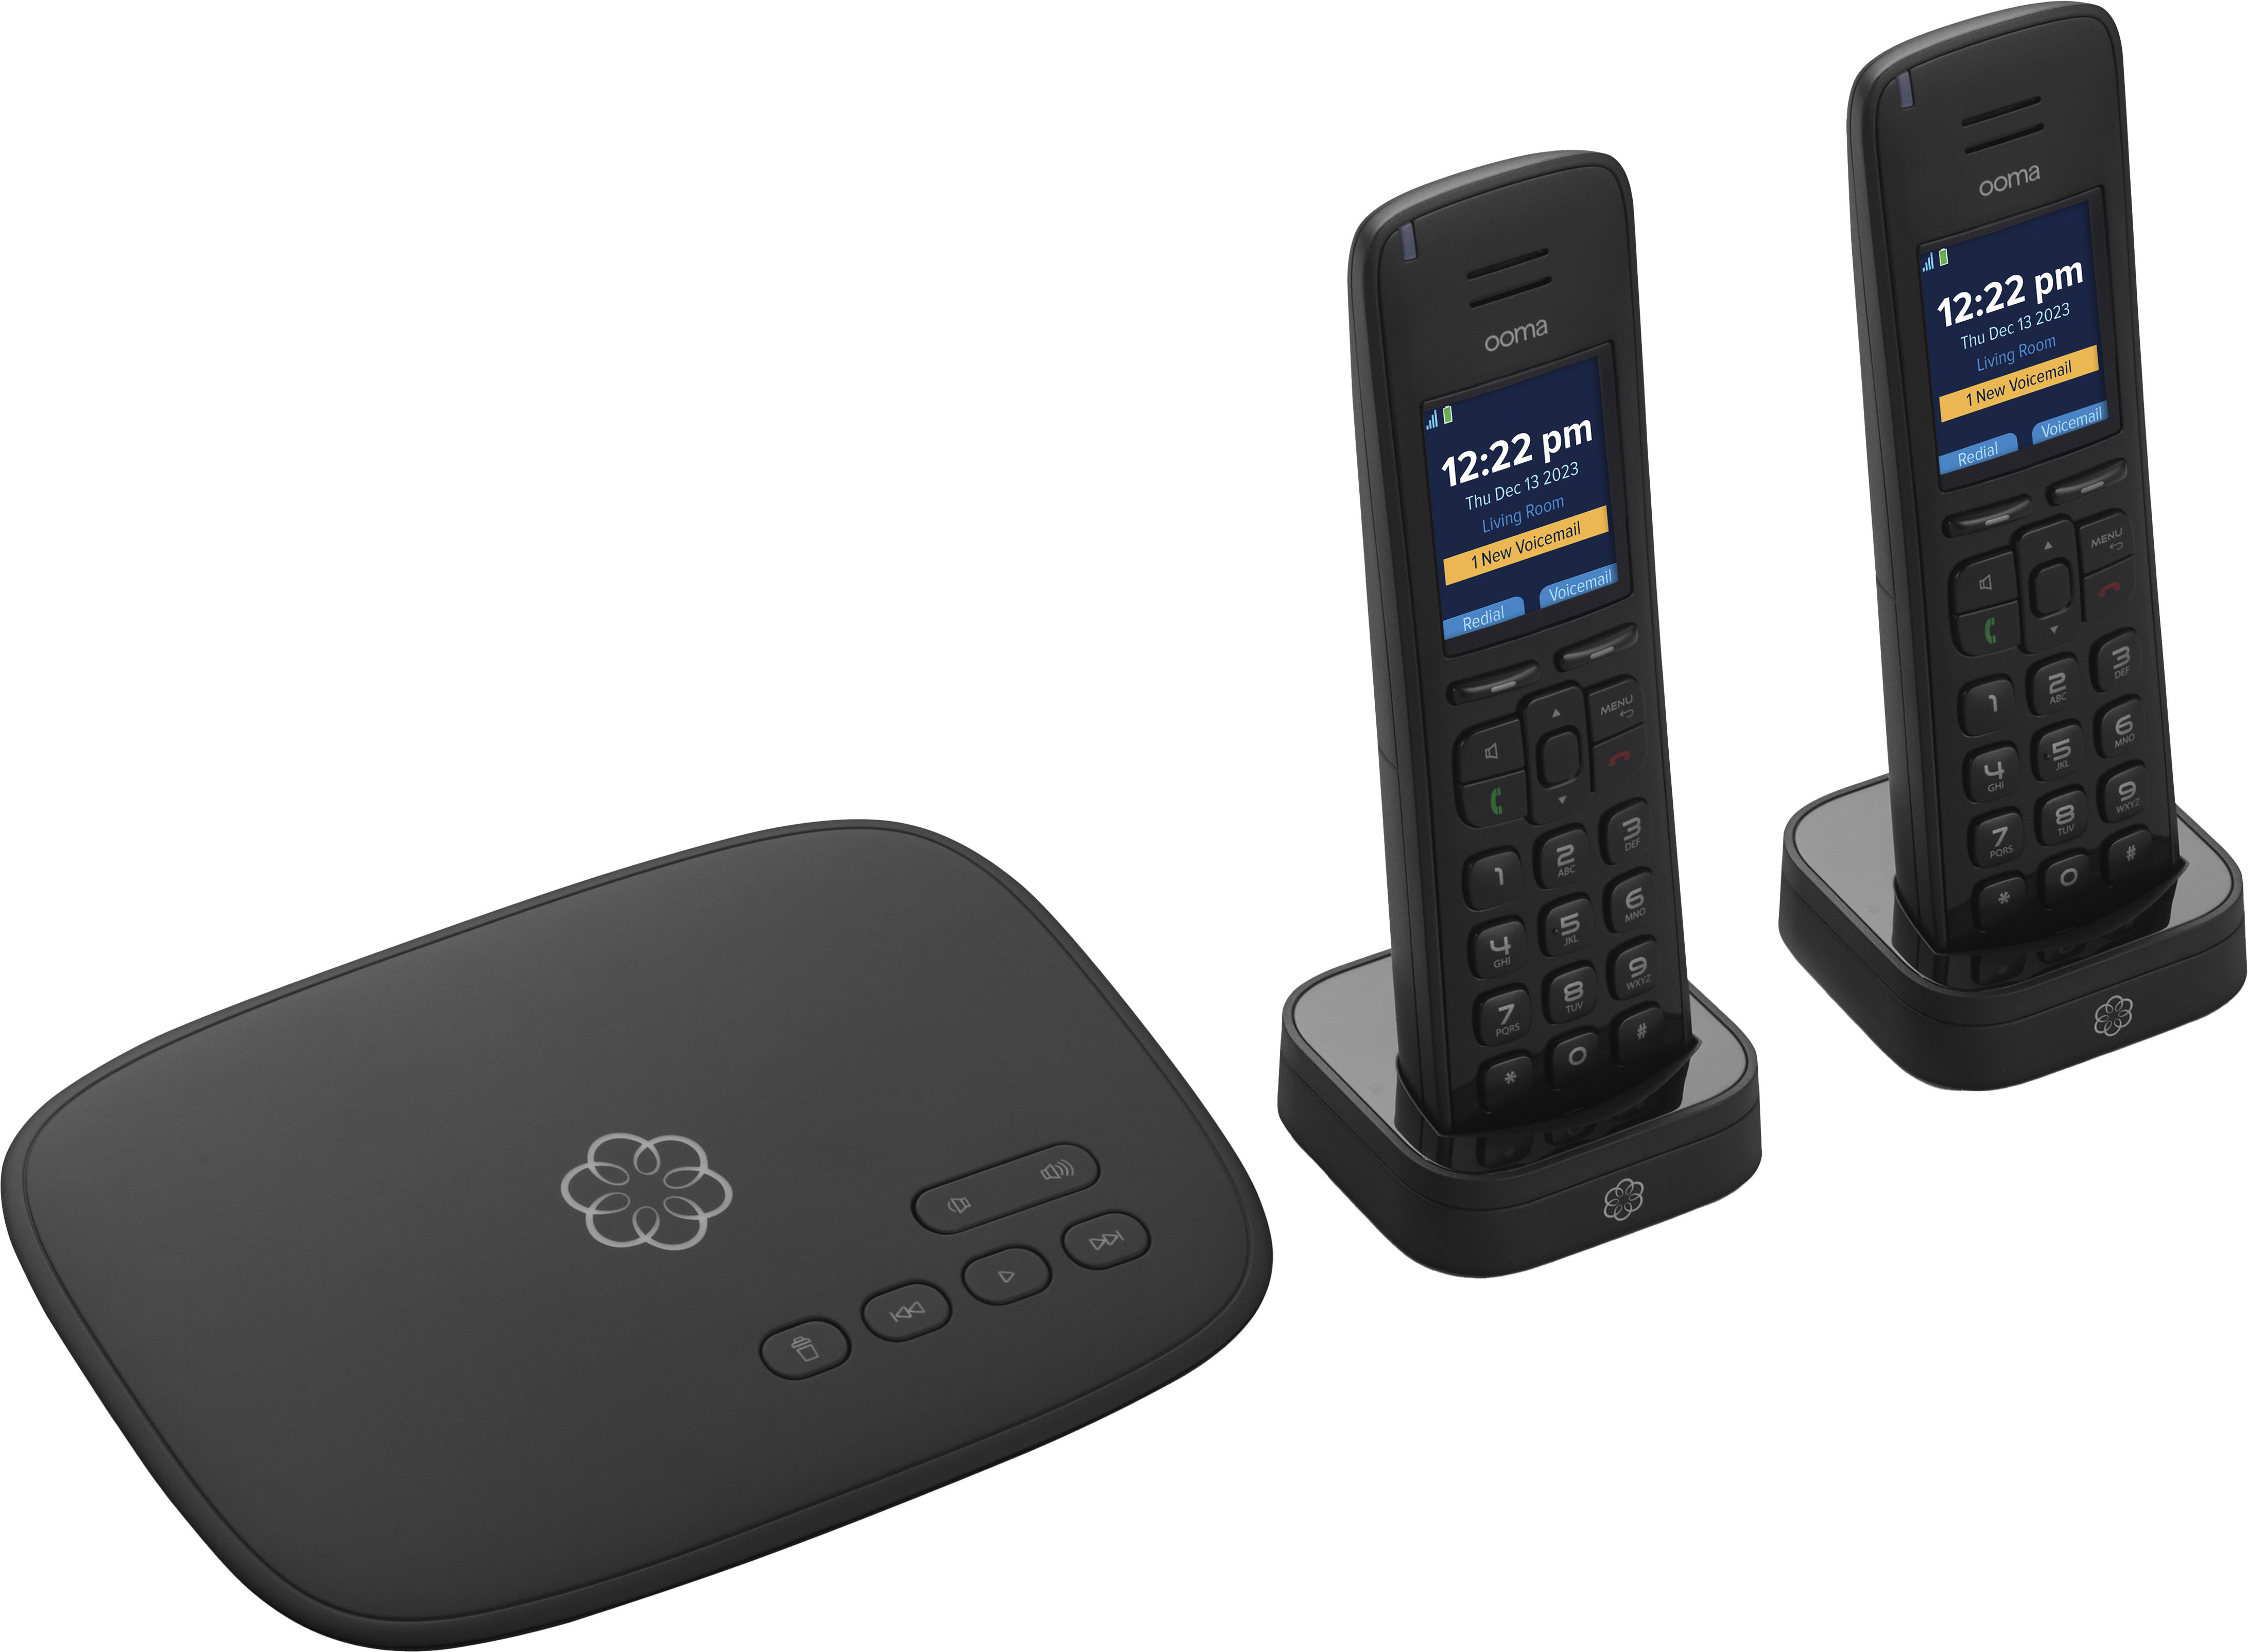 Ooma Telo Free Home Phone Service PureVoice HD Sound Quality 